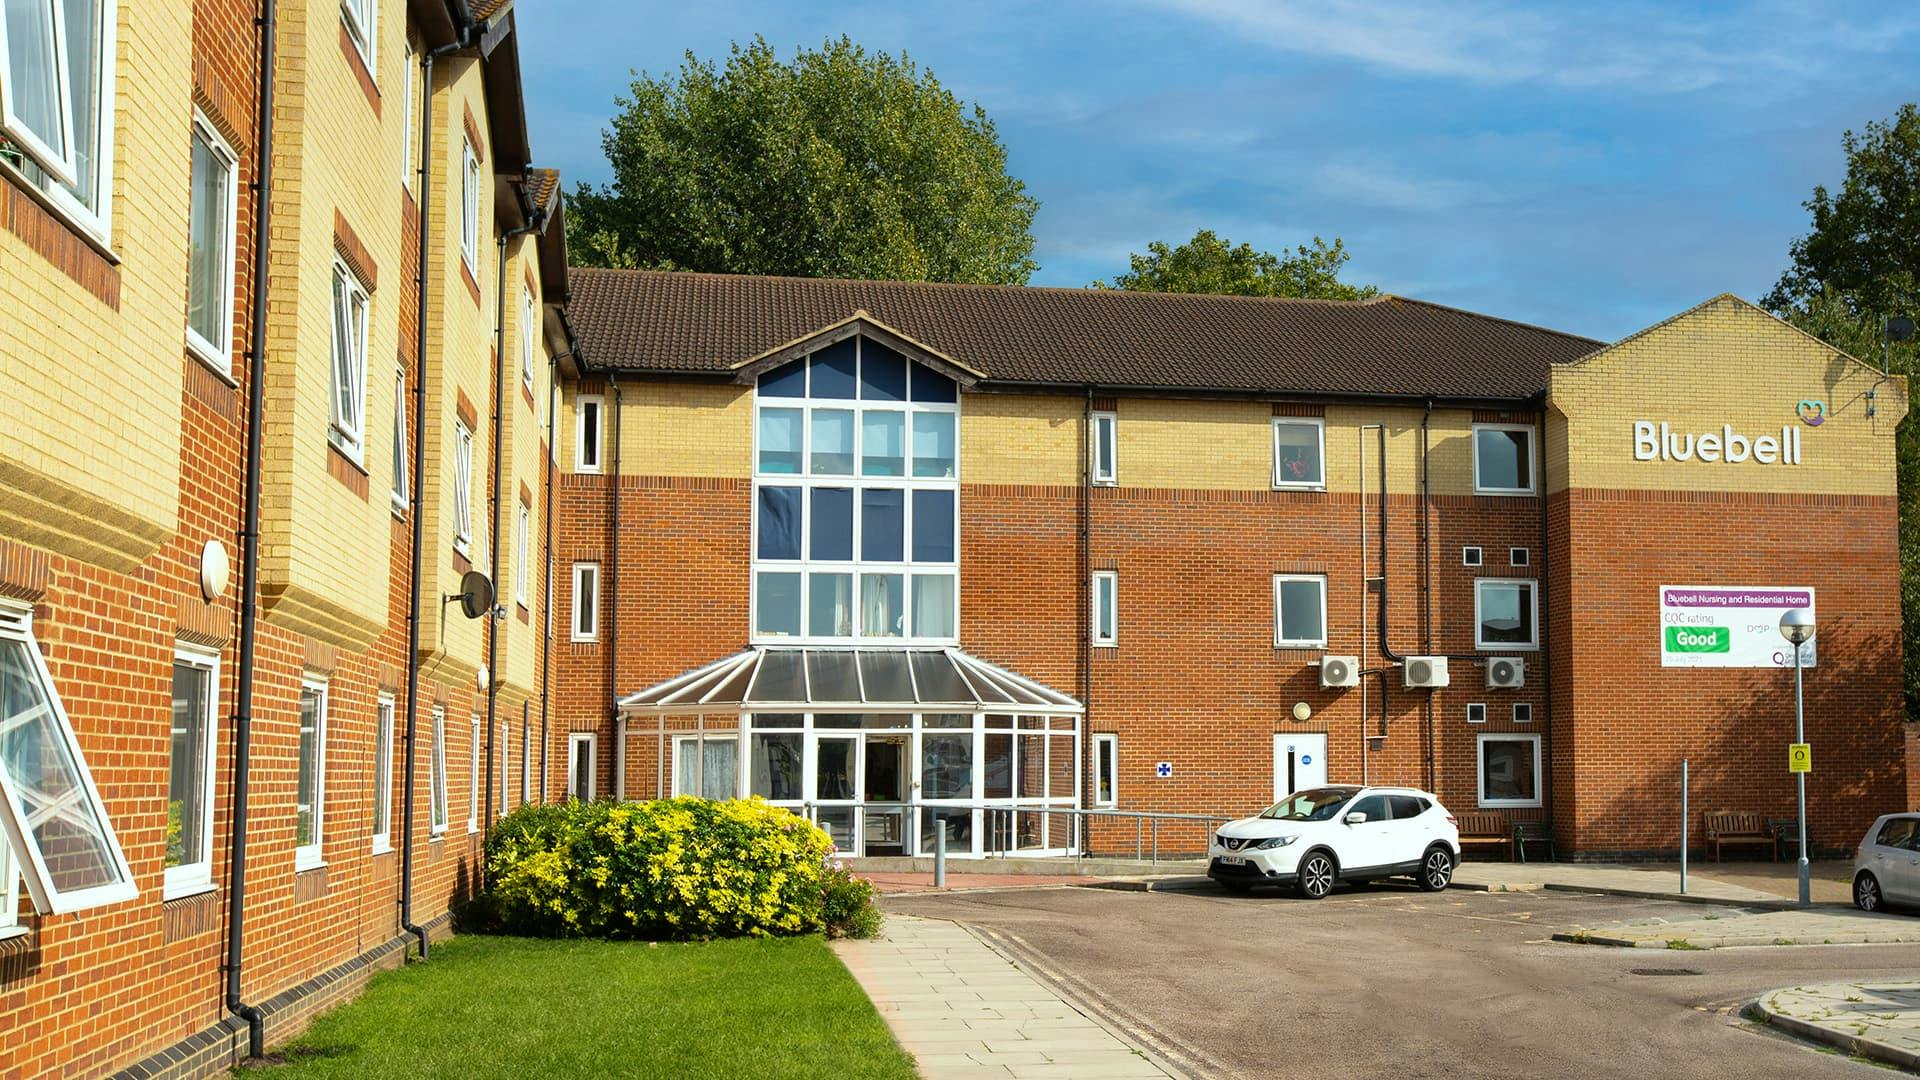 Bluebell care home in Grays 1